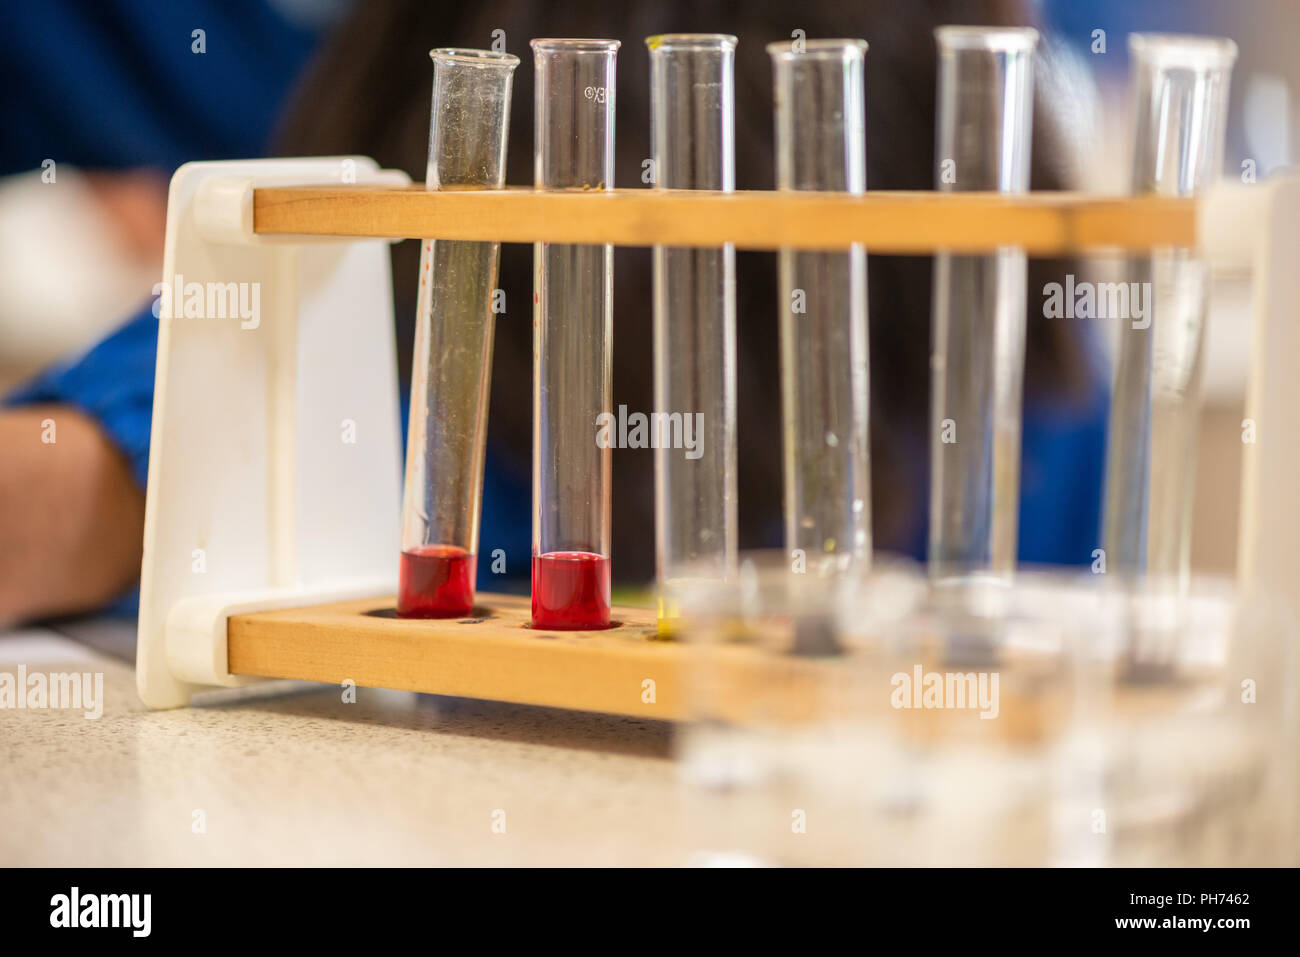 Coloured test tubes photographed in a school classroom during a science lesson and experiment. Stock Photo